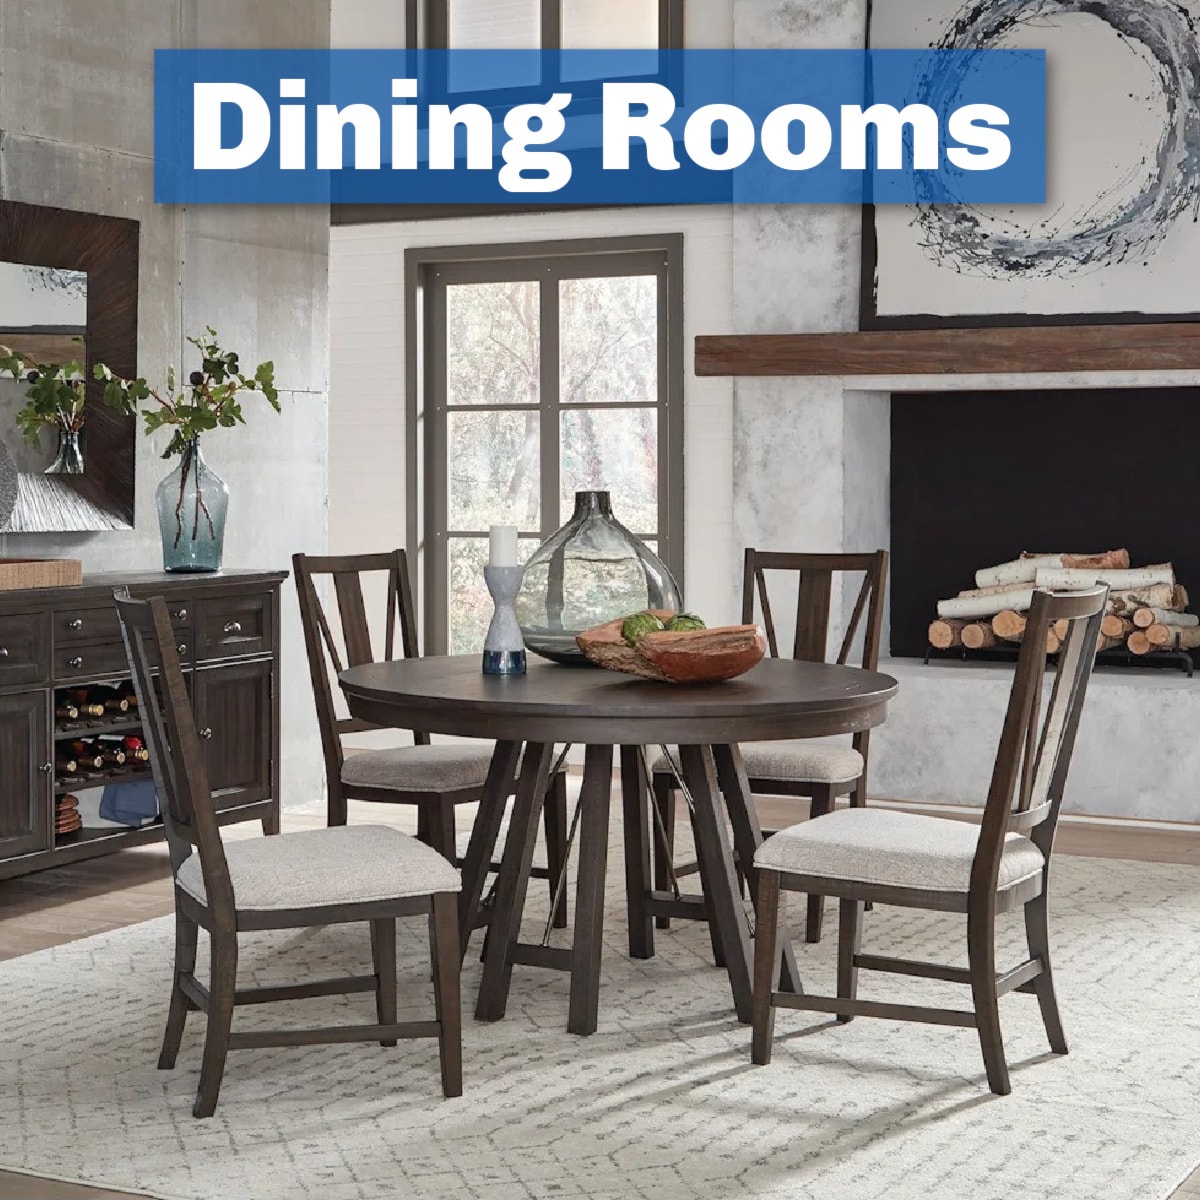 dining rooms image